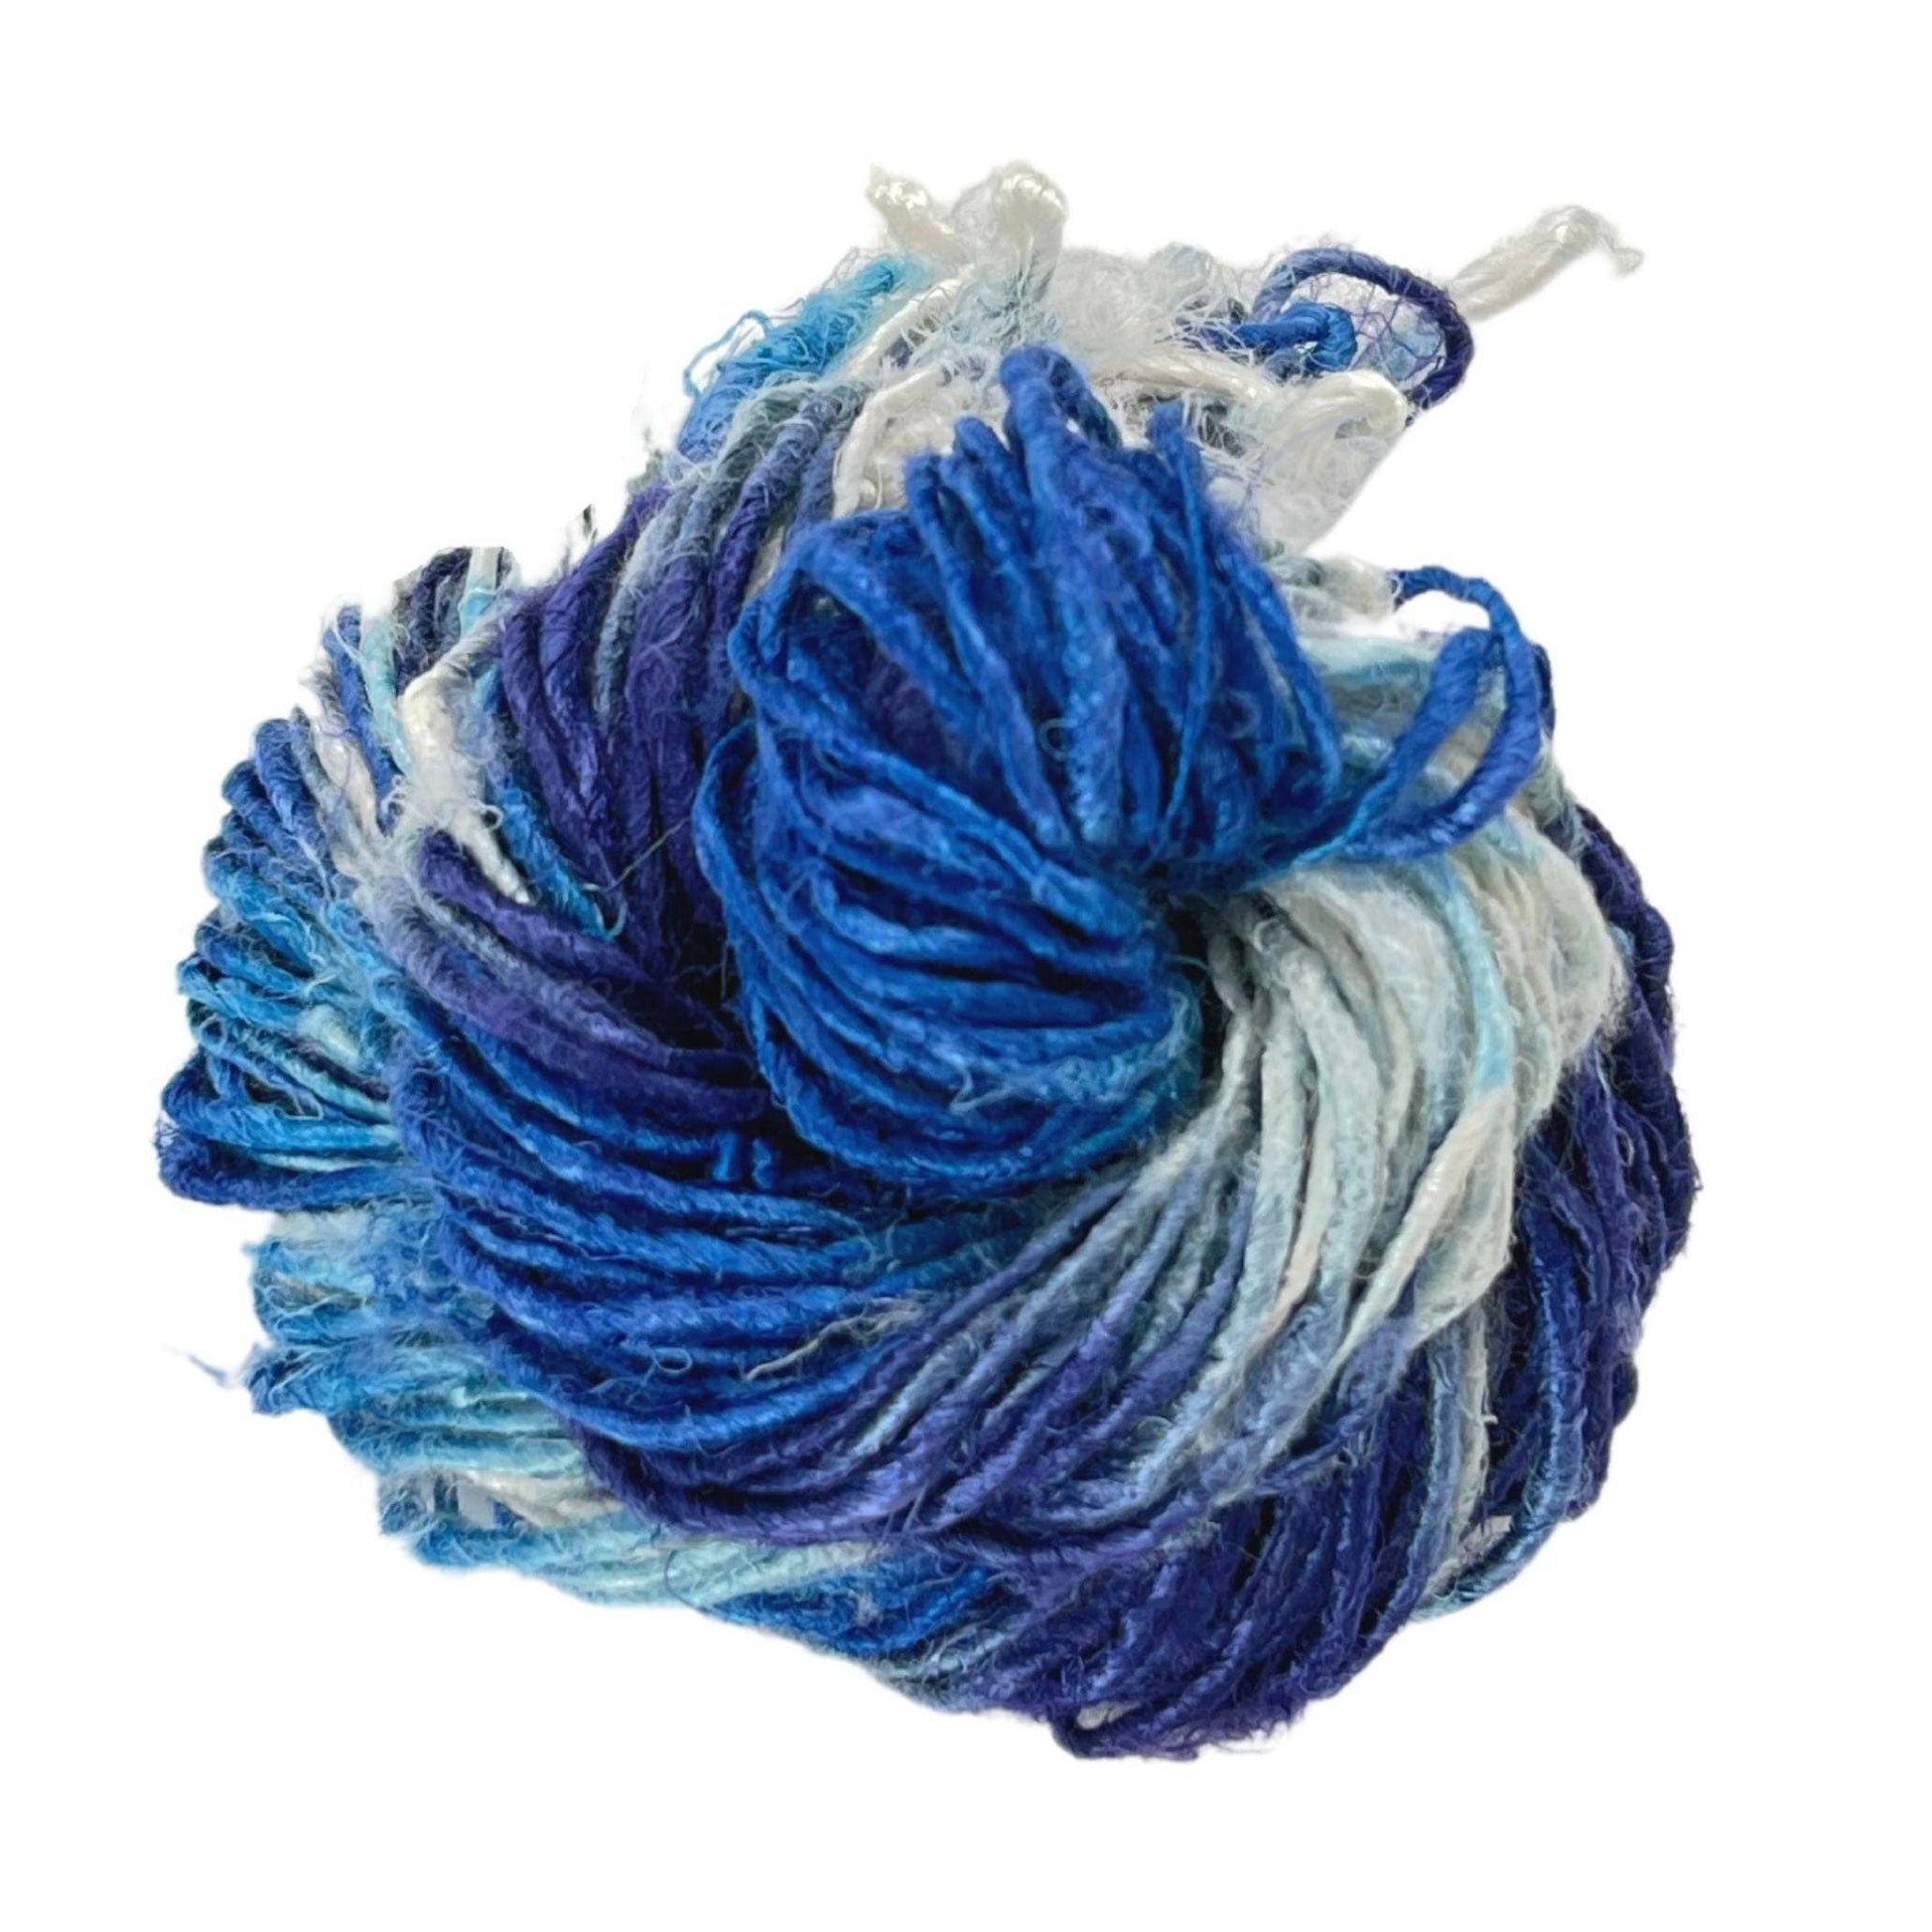 Top view of skein of Ikat Indigo banana fiber yarn curled into a birds nest shape in front of a white background.